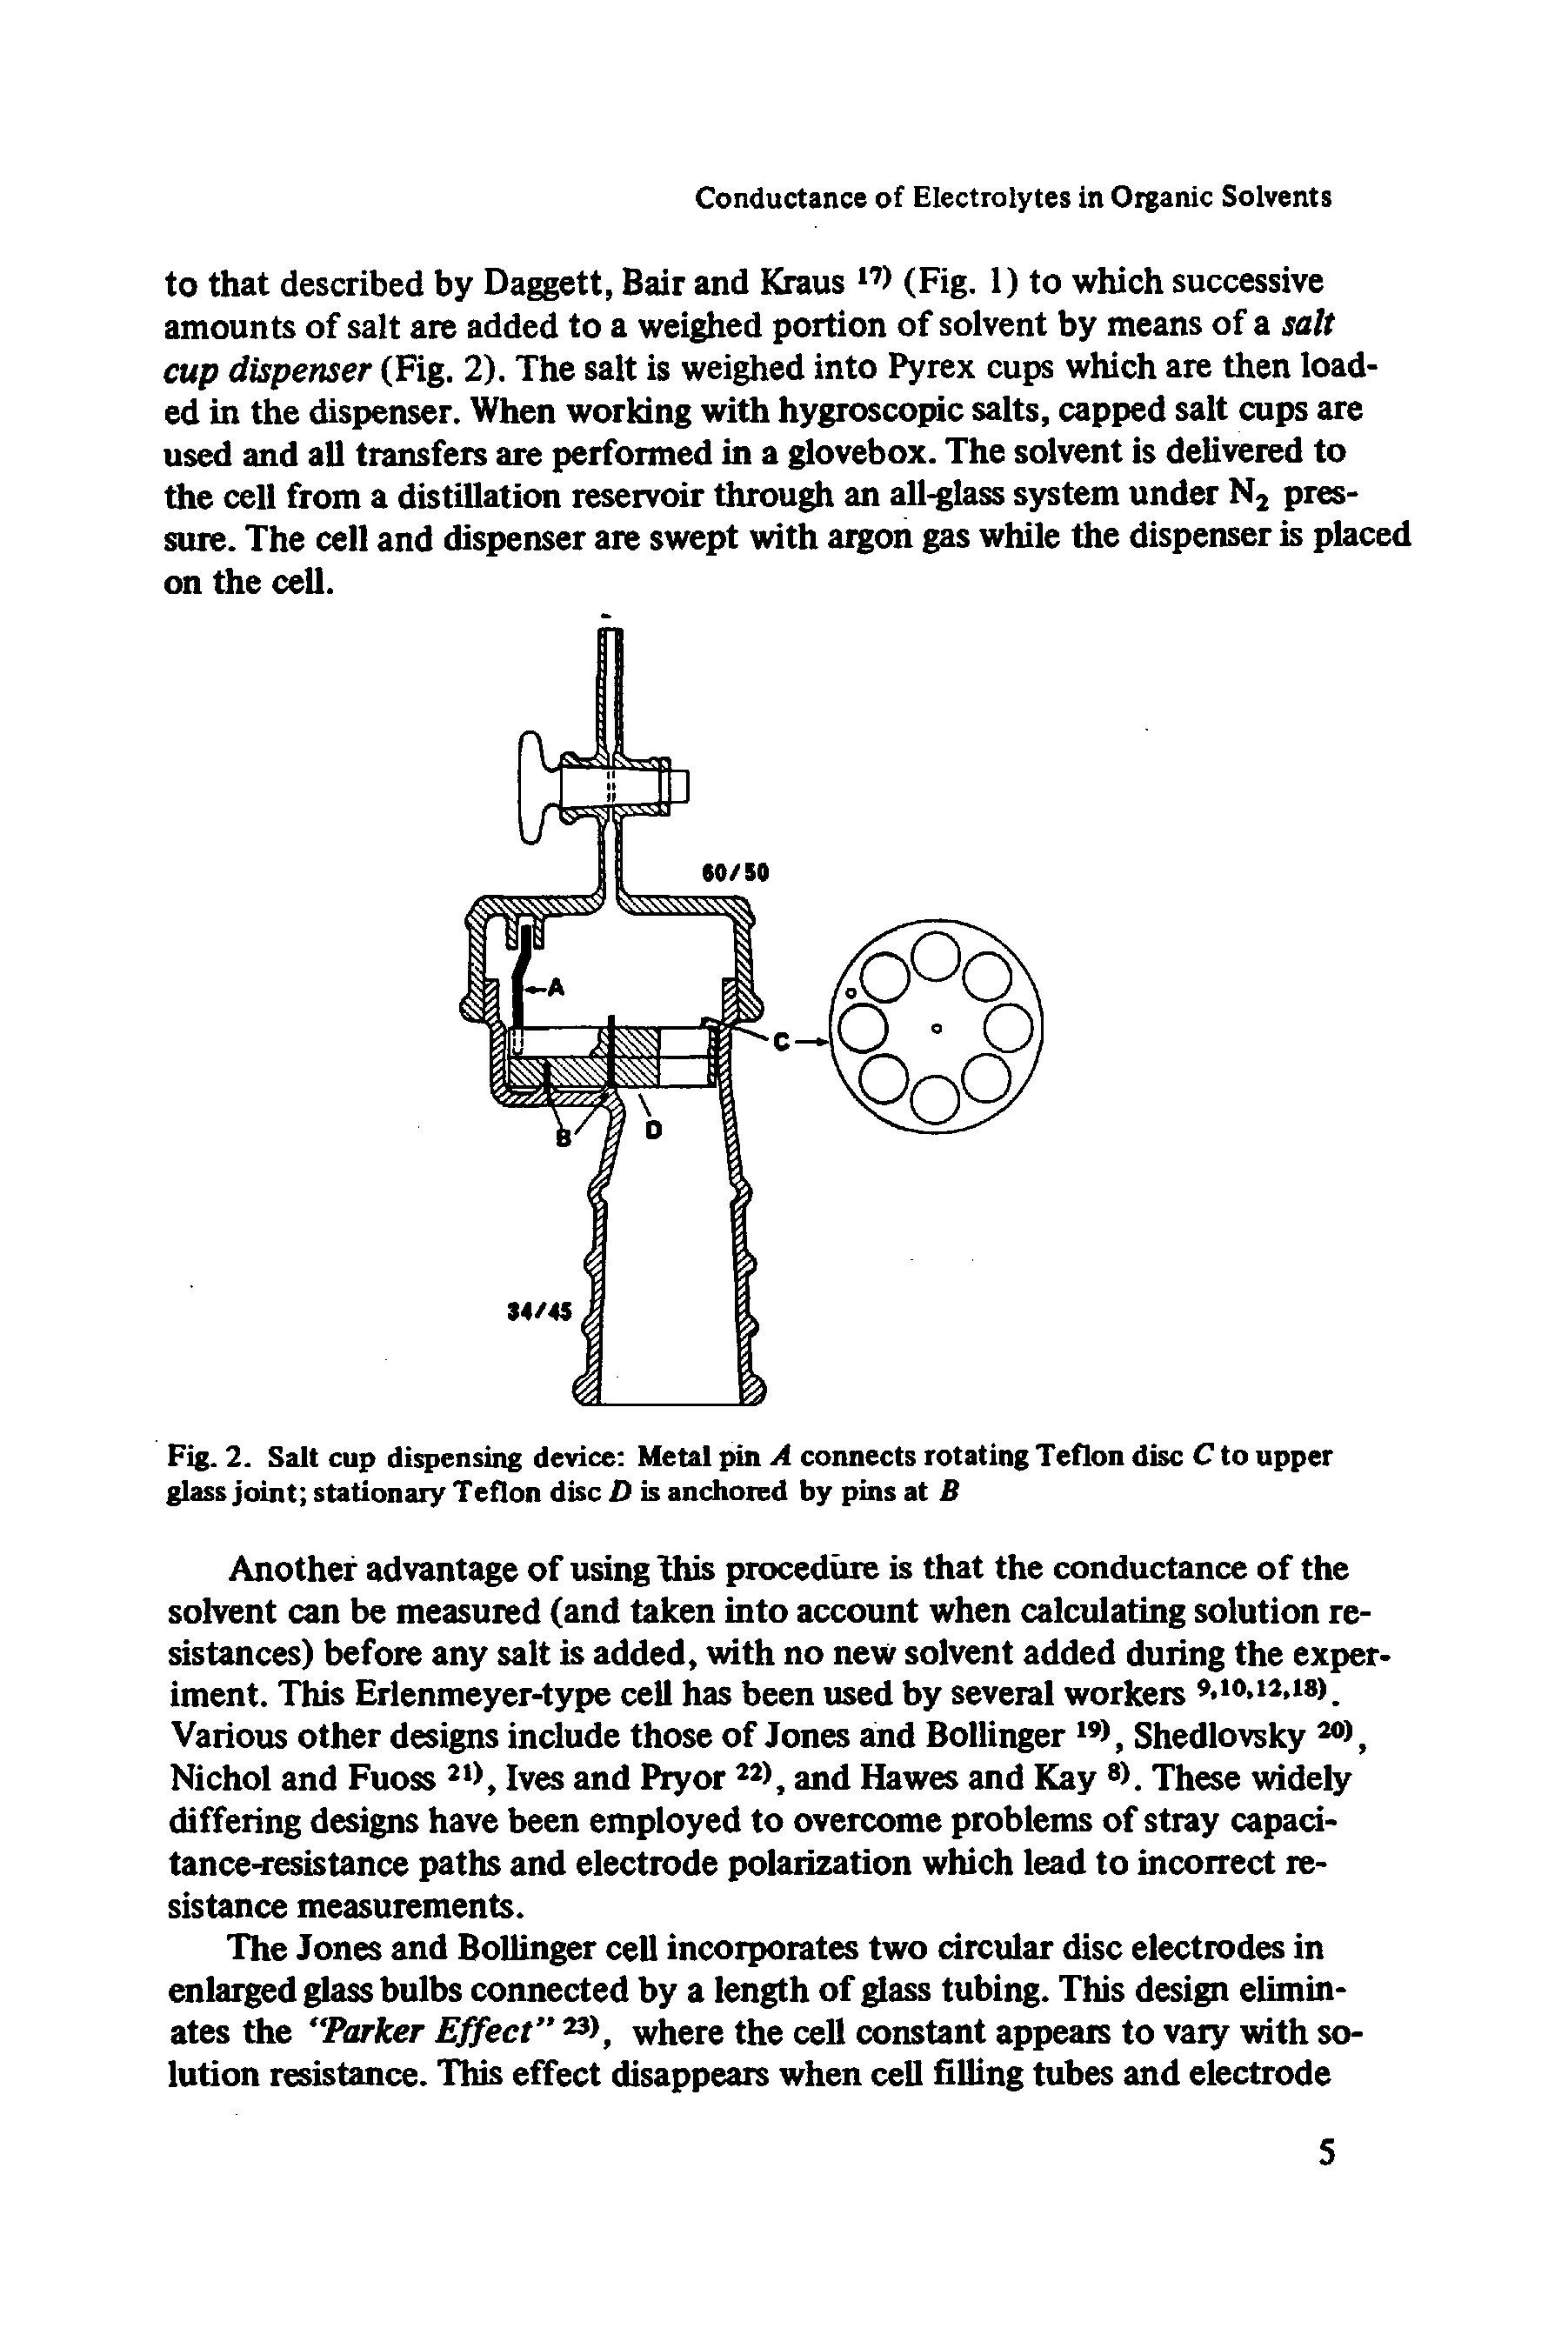 Fig. 2. Salt cup dispensing device Metal pin A connects rotating Teflon disc C to upper glass joint stationary Teflon disc D is anchored by pins at B...